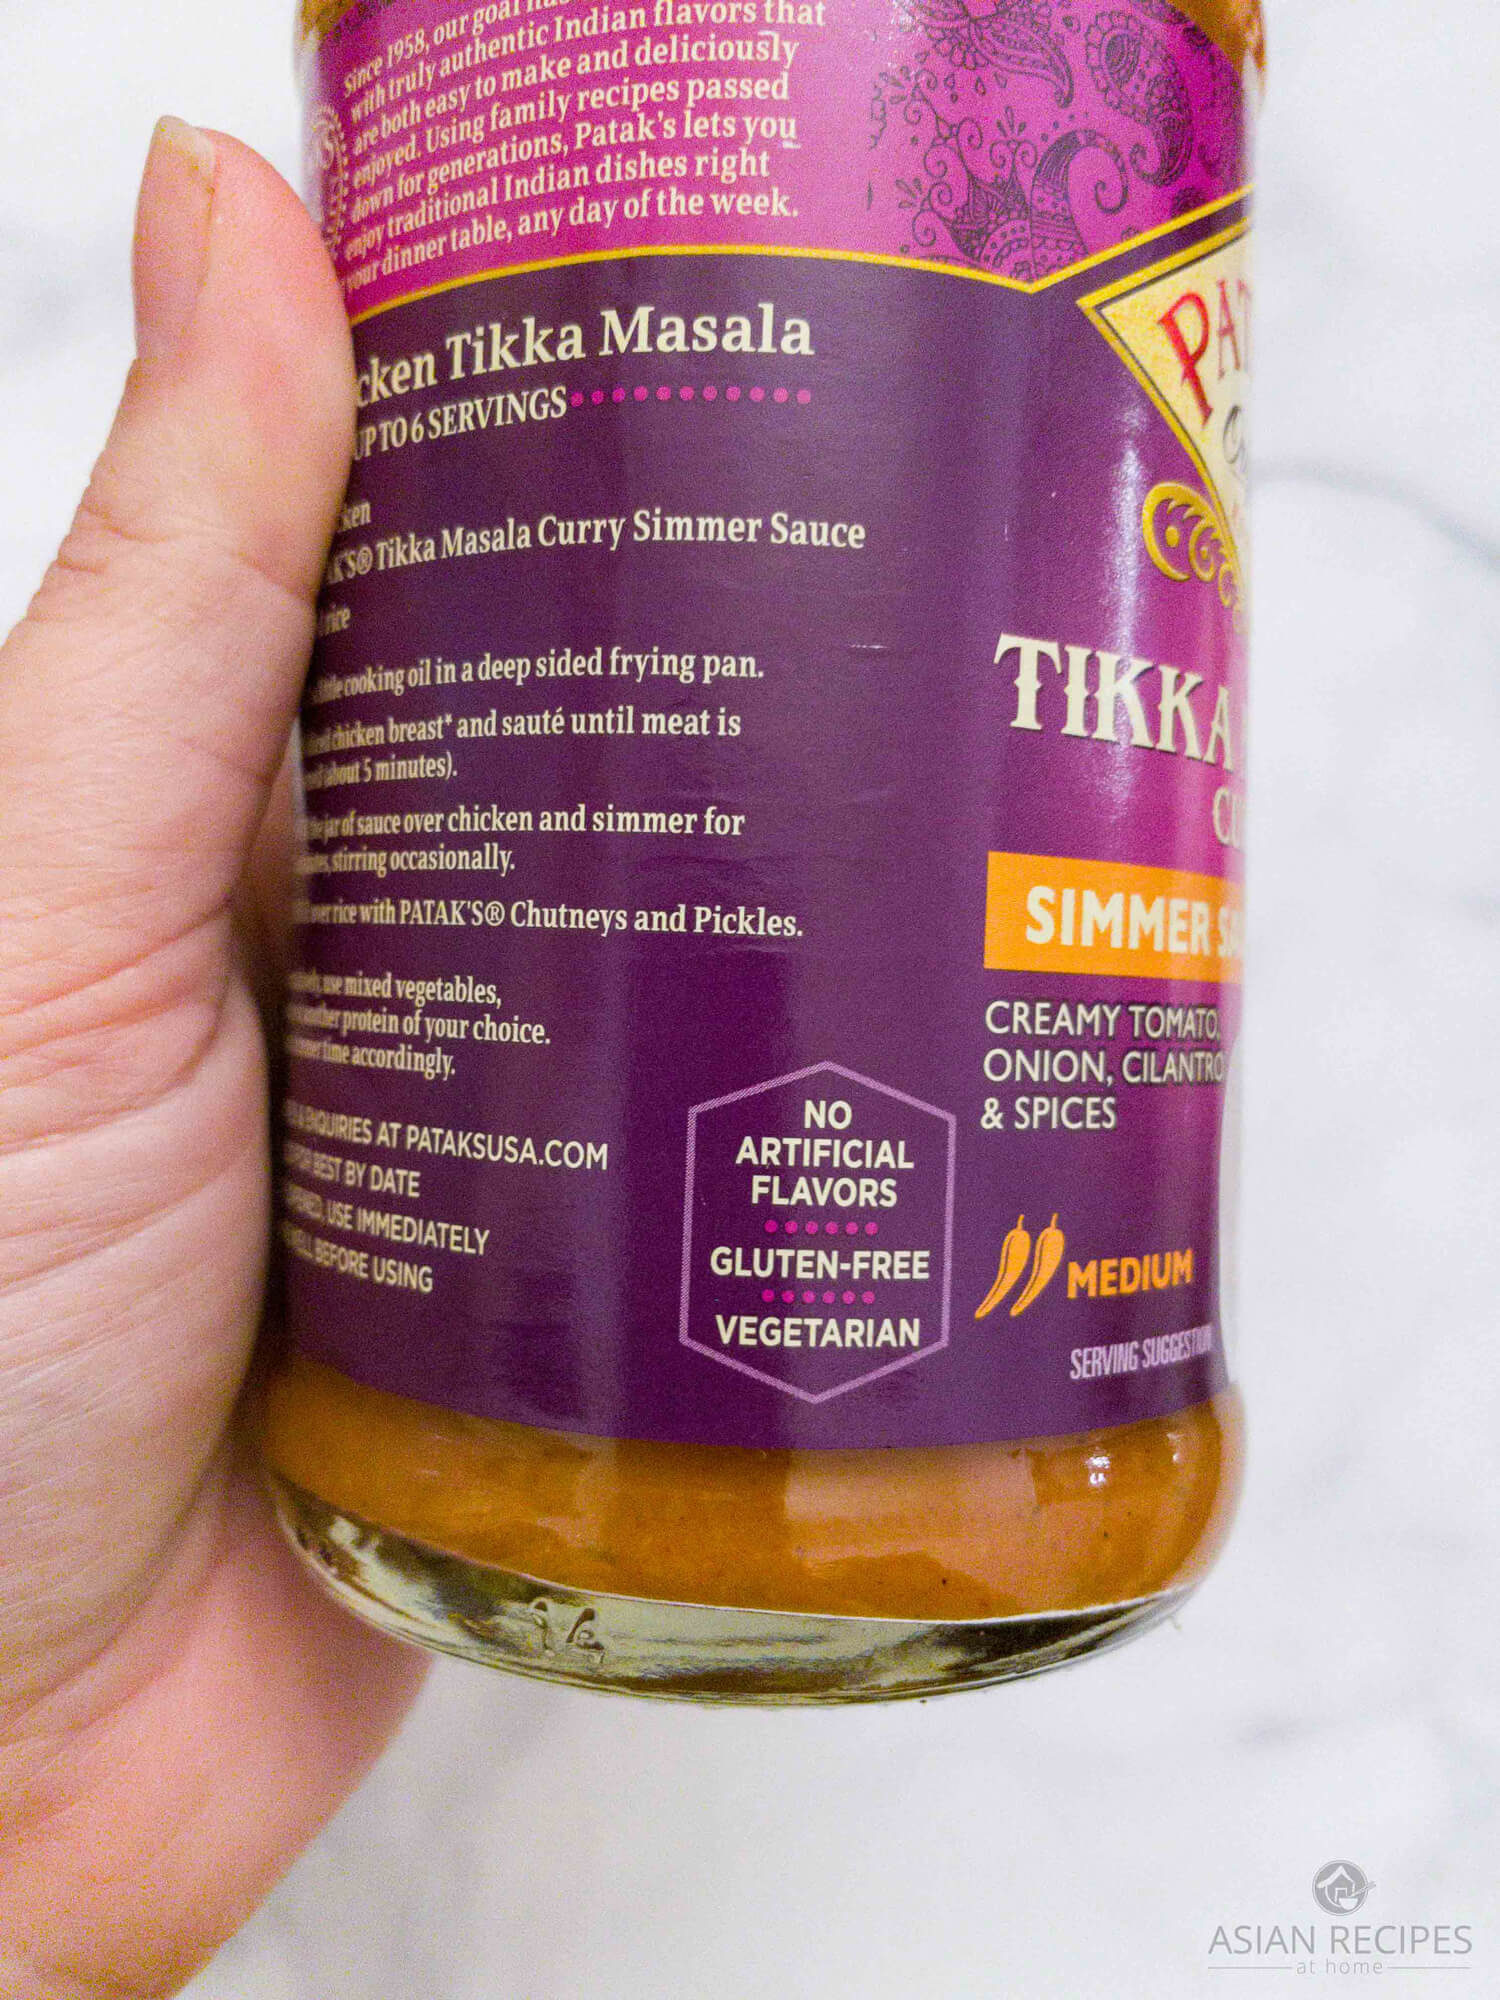 The gluten-free label in the store-bought jar of Patak's Tikka Masala Curry